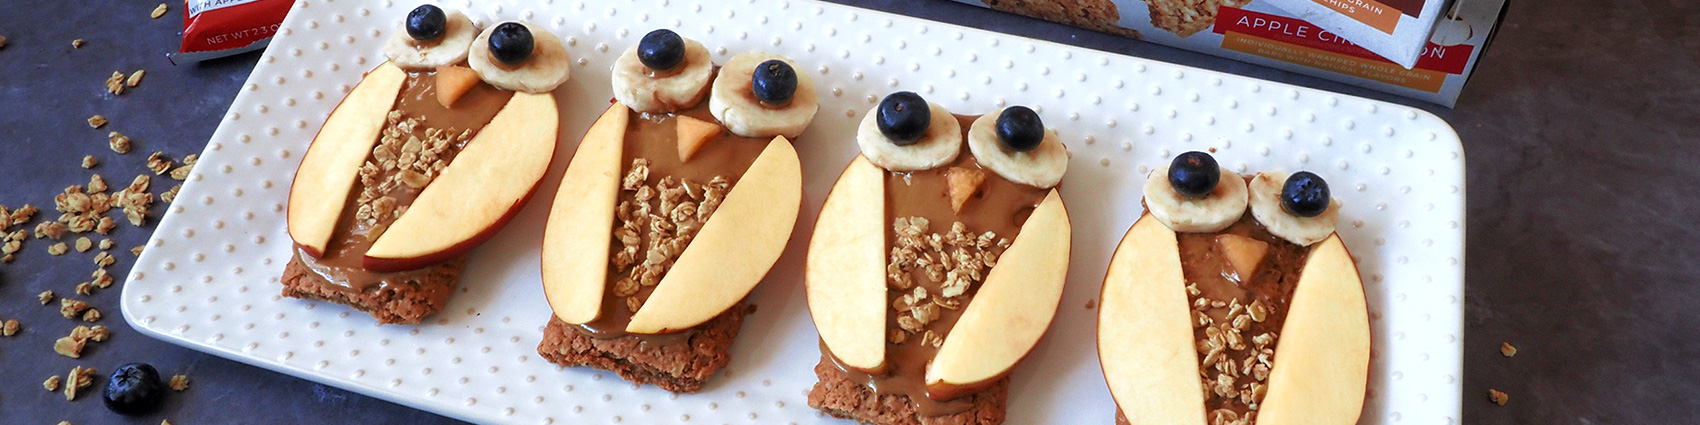 Grains 2 Go bars topped with apples, bananas, and blueberries made to look like owls